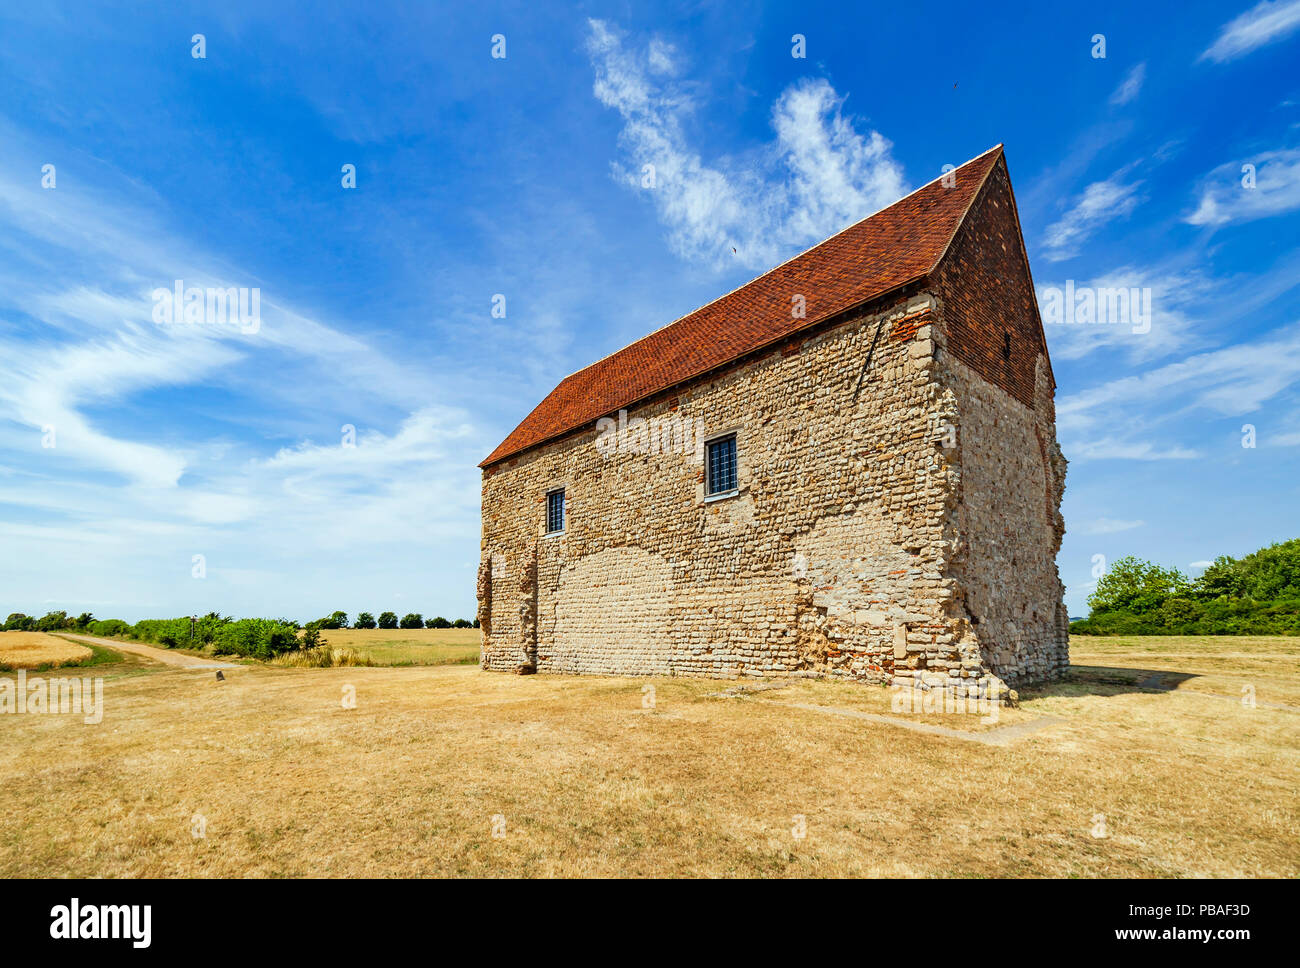 Chapel of St Peter on the Wall. One of the oldest churches in the UK. Stock Photo